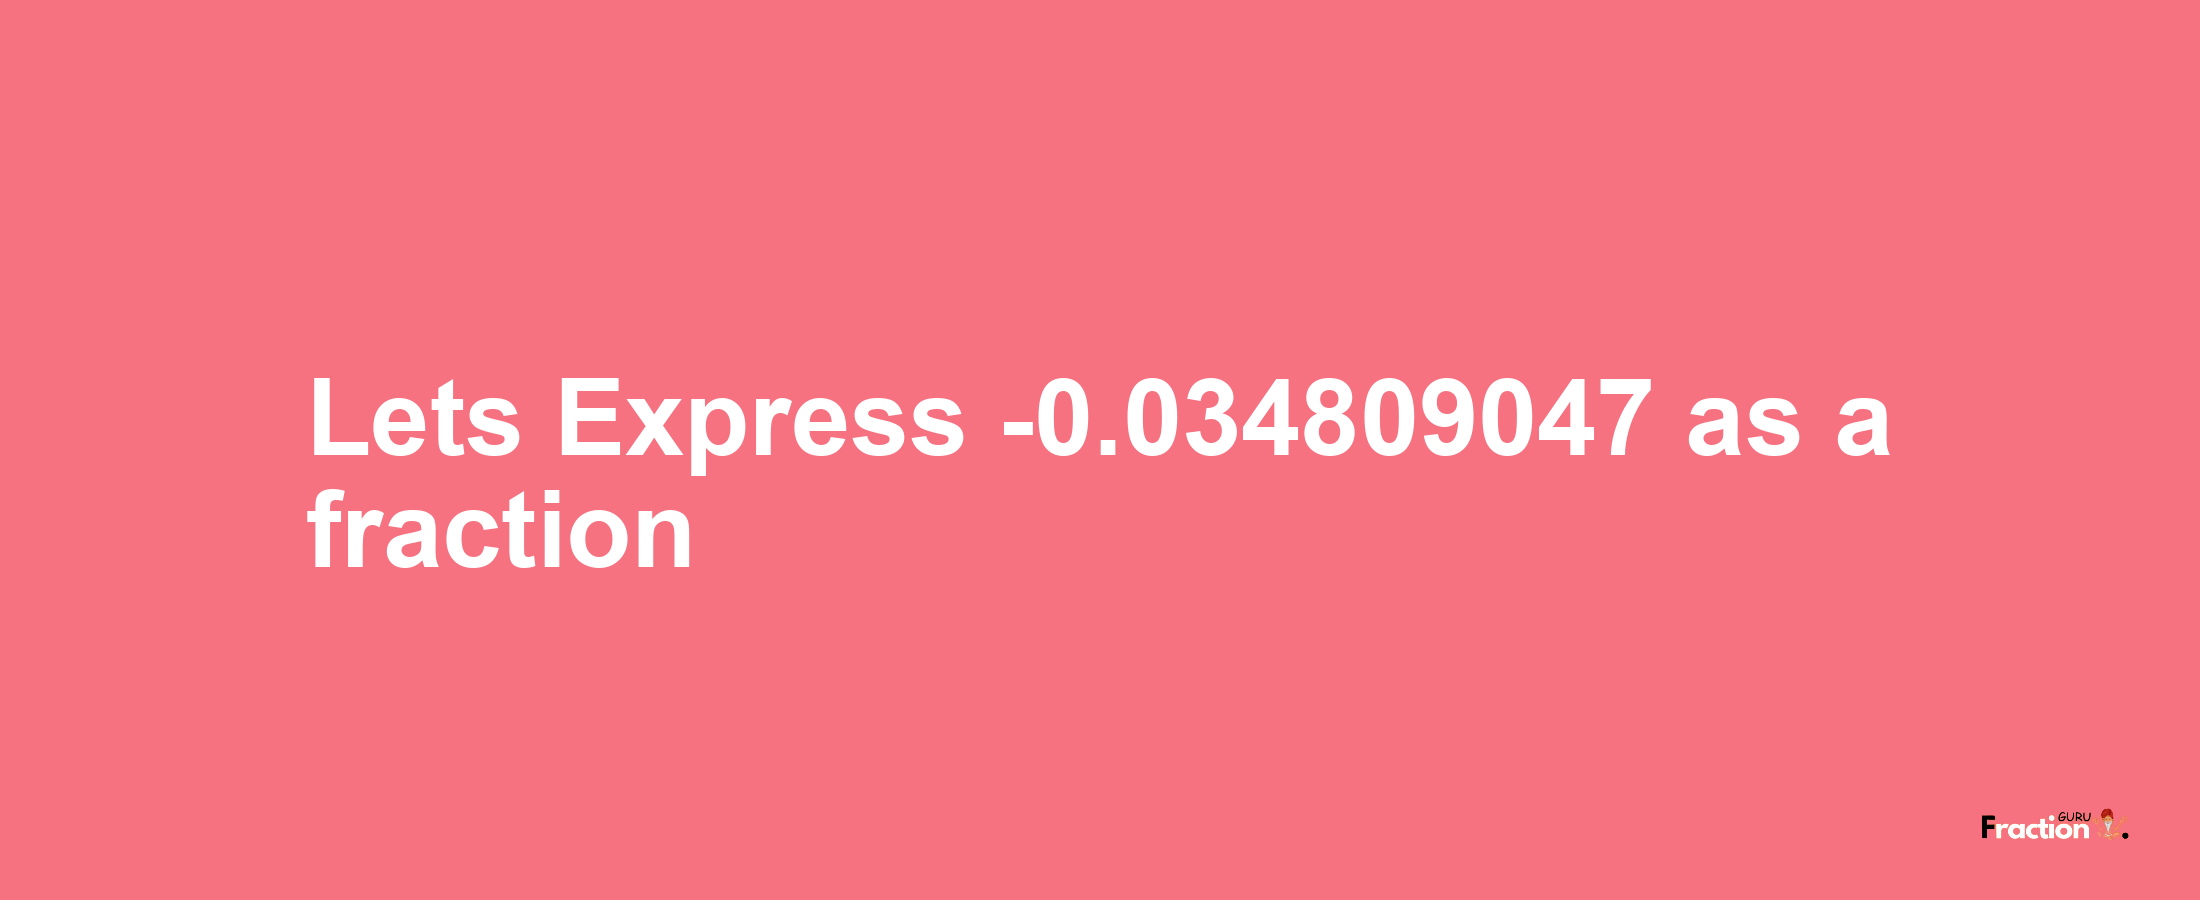 Lets Express -0.034809047 as afraction